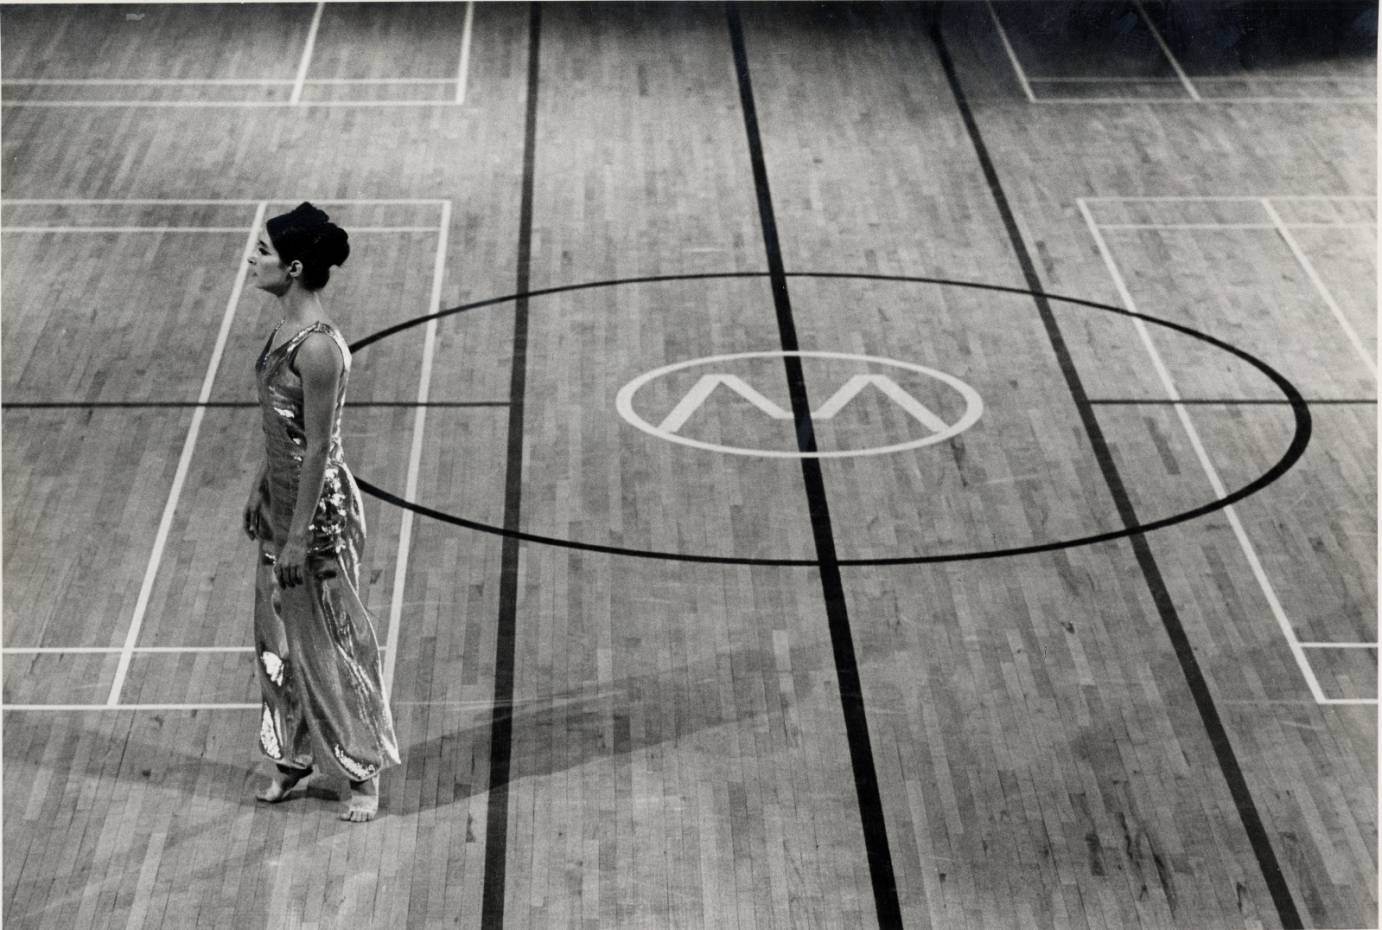 A woman stands in relve in side profile on basketball court. She's barefoot and wears an iridescent costume.